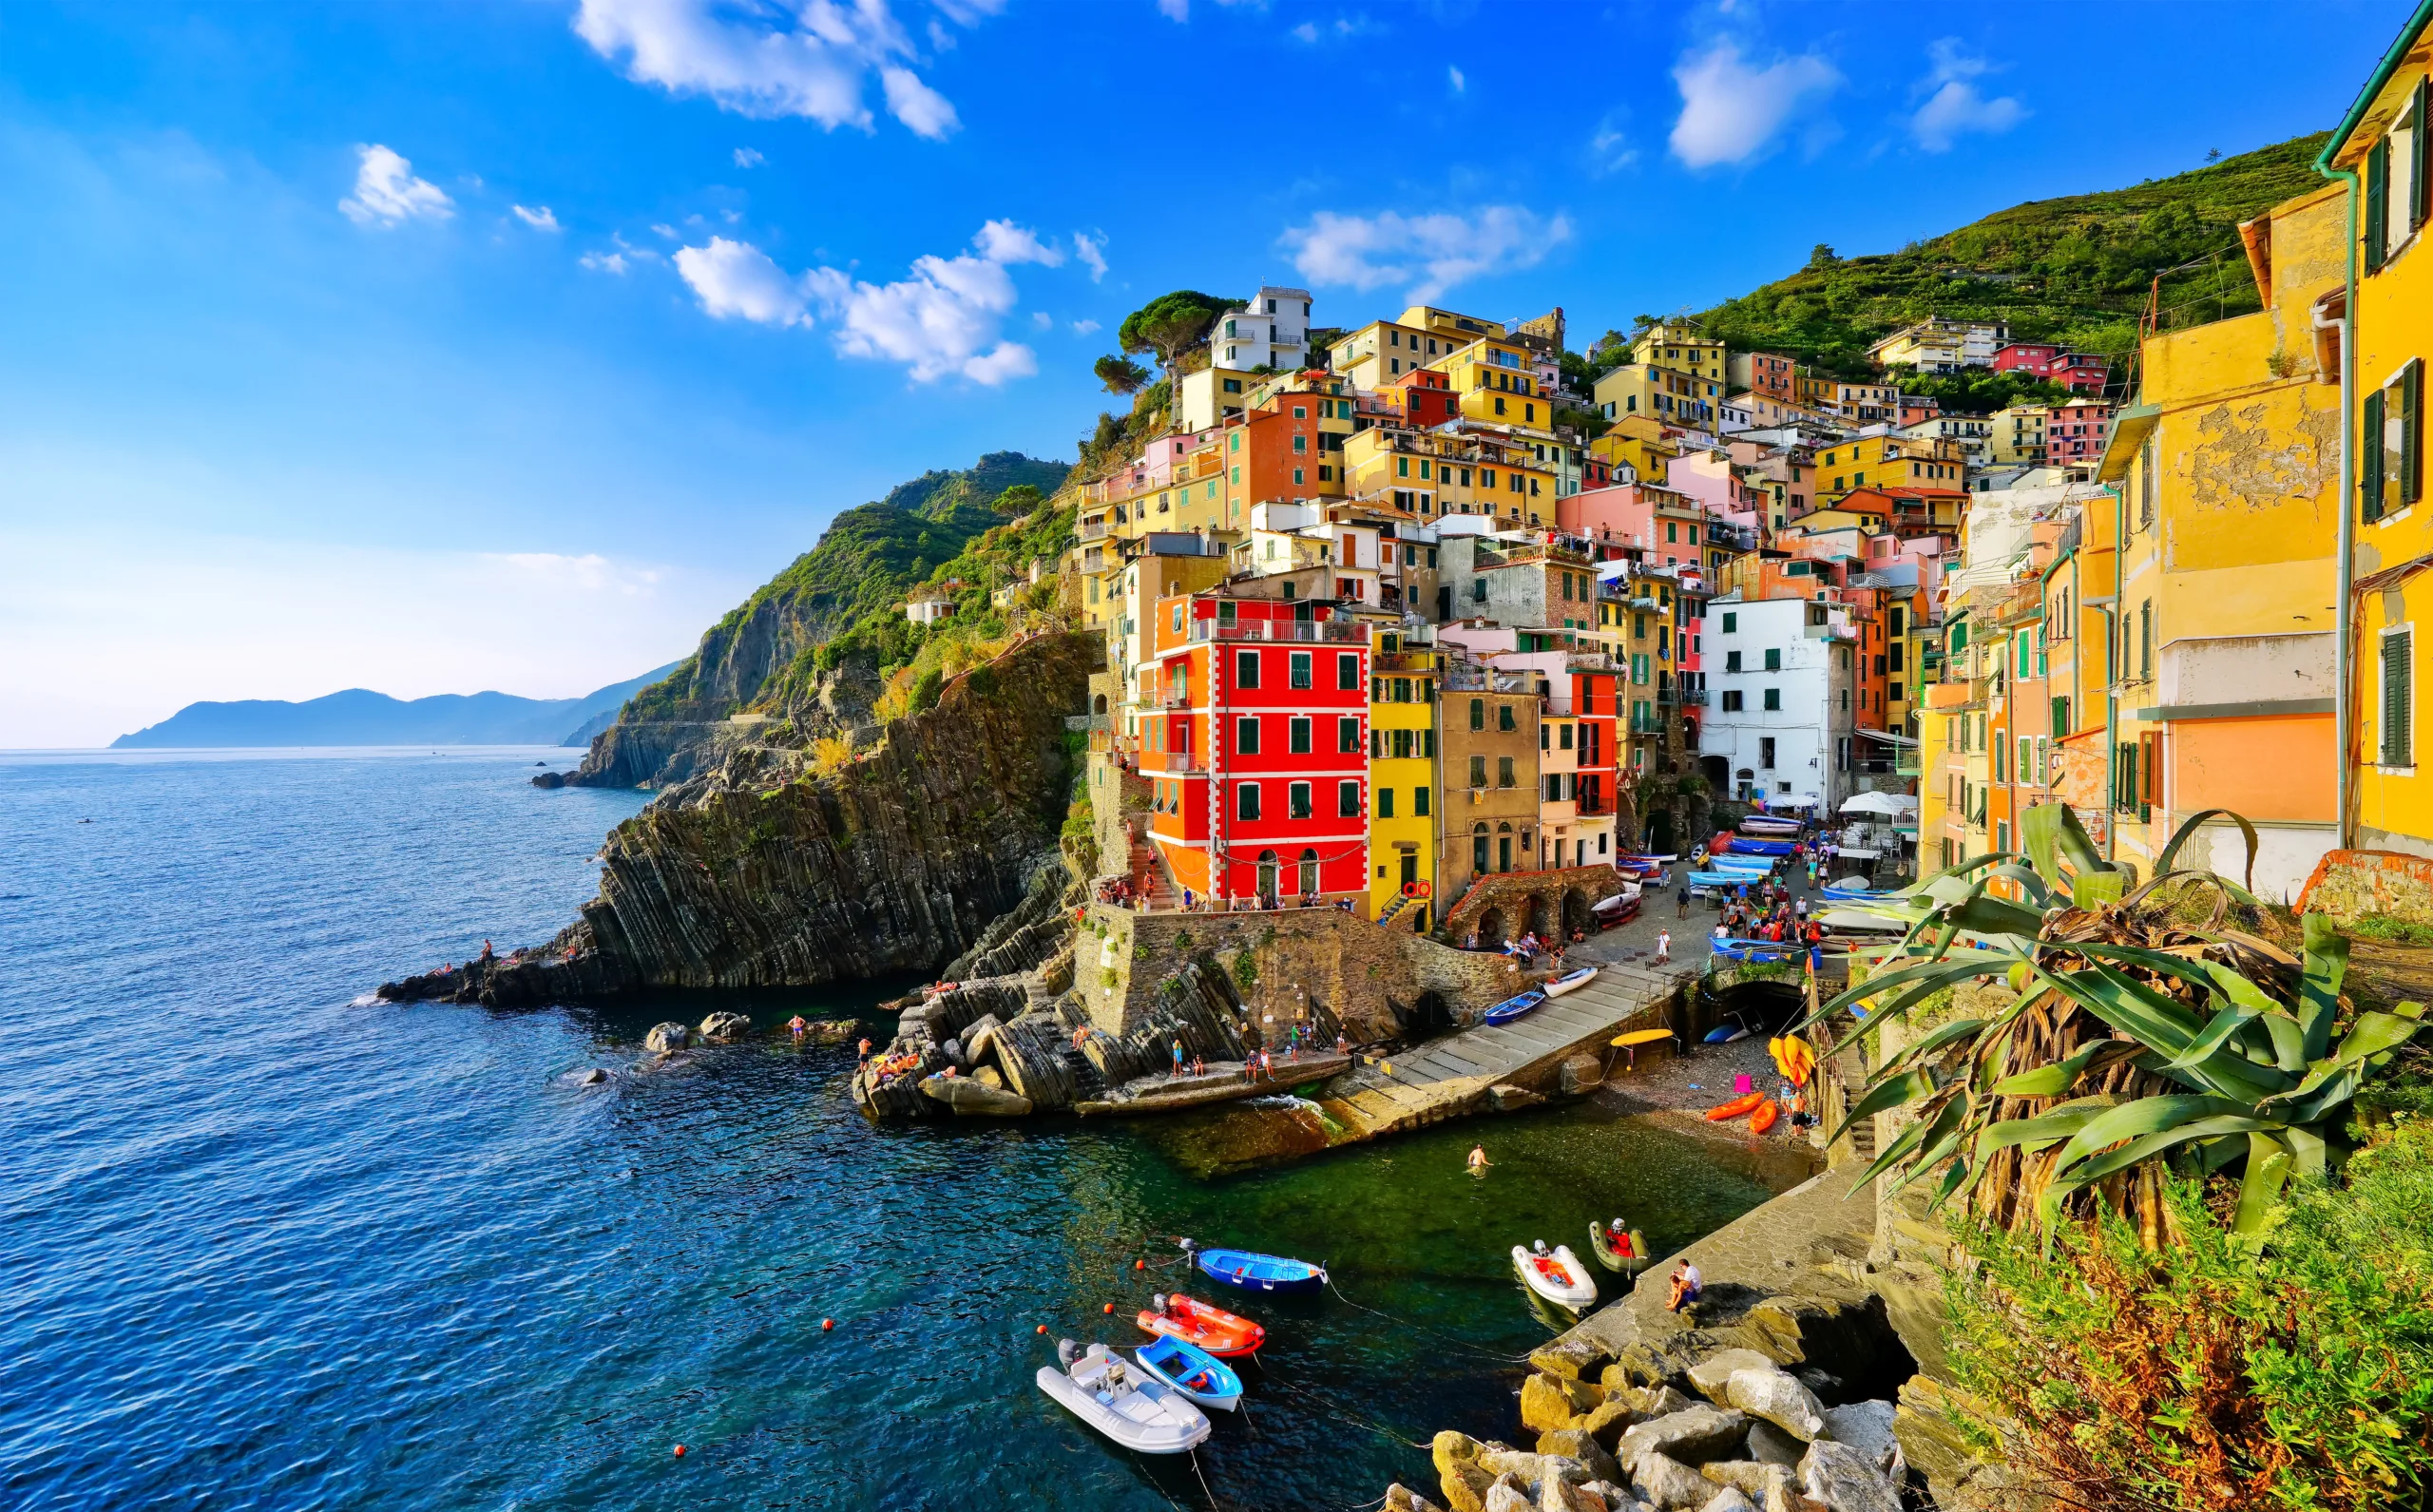 View of colourful cliffside houses in La Spezia